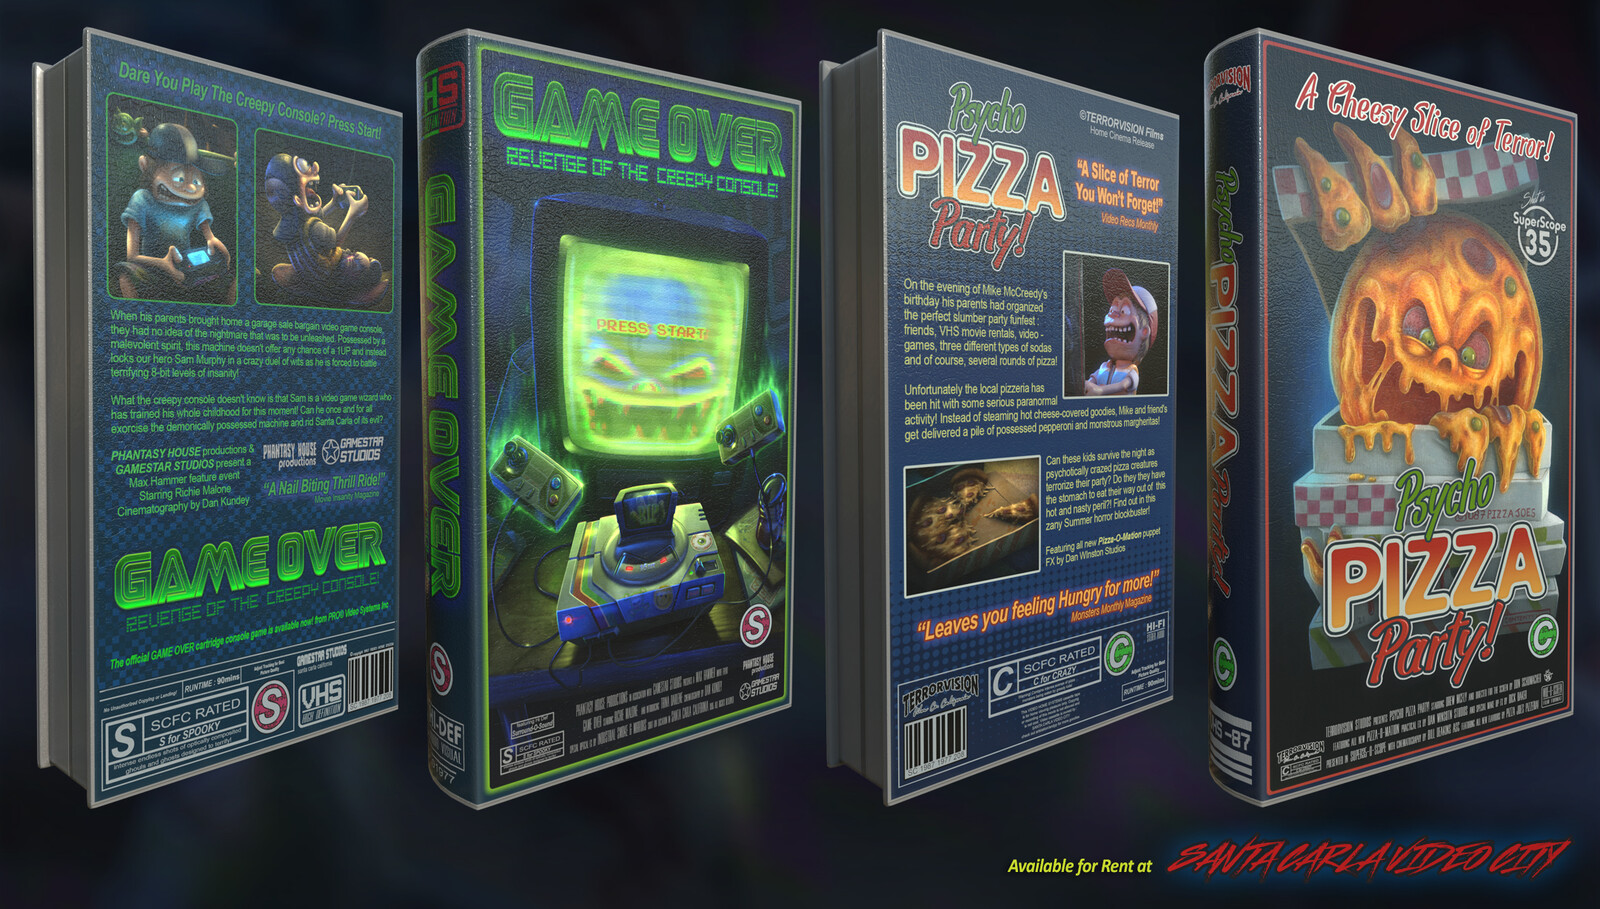 Front and back covers. Creating story synopses for these movies is half the fun!